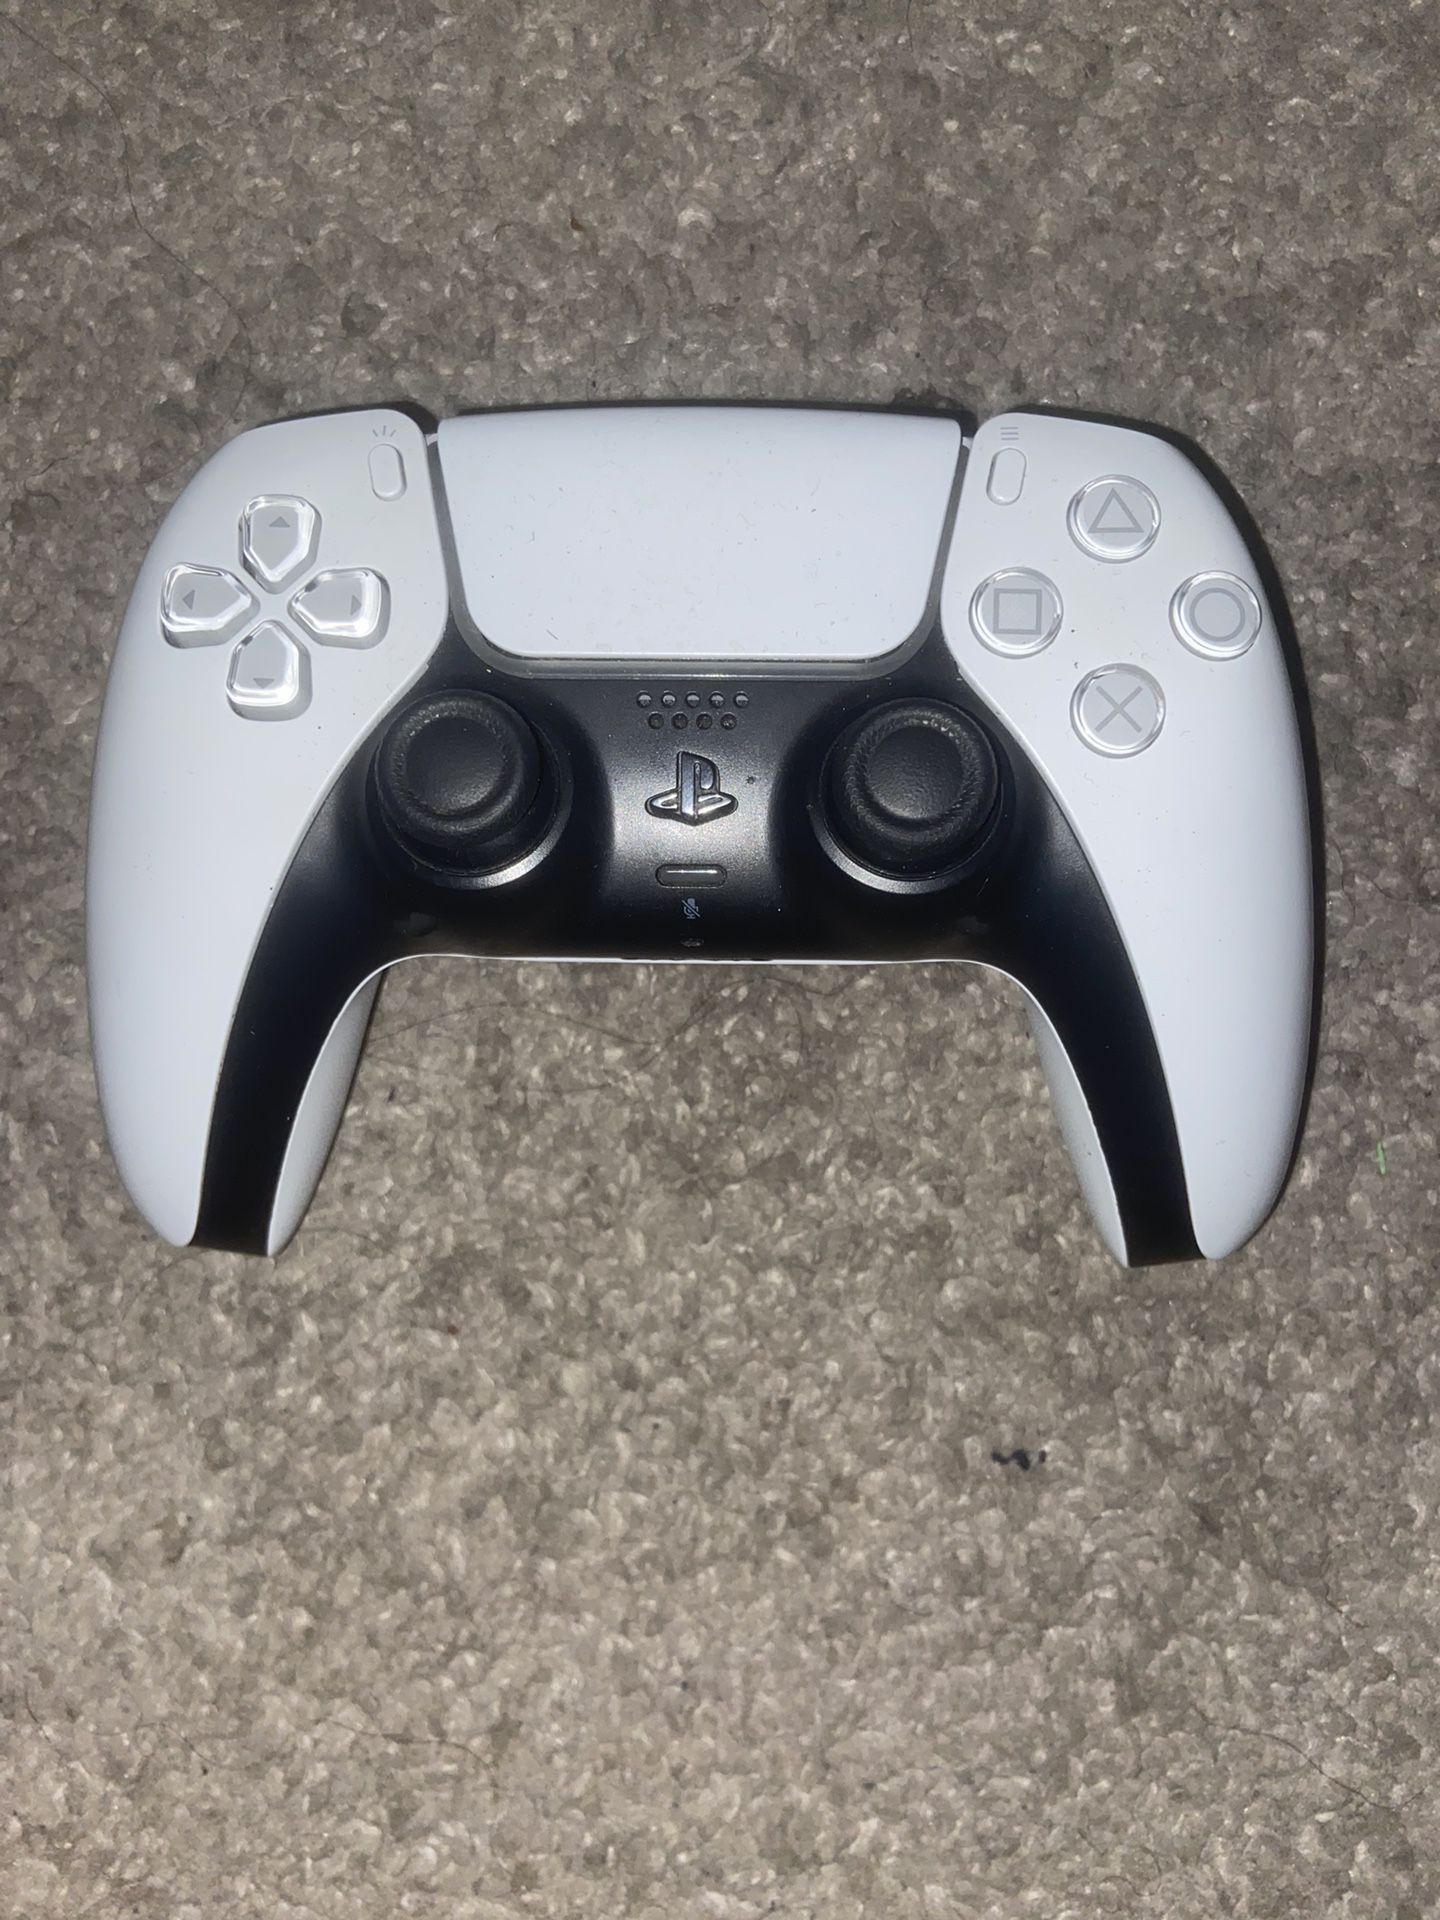 Used PlayStation Controller 